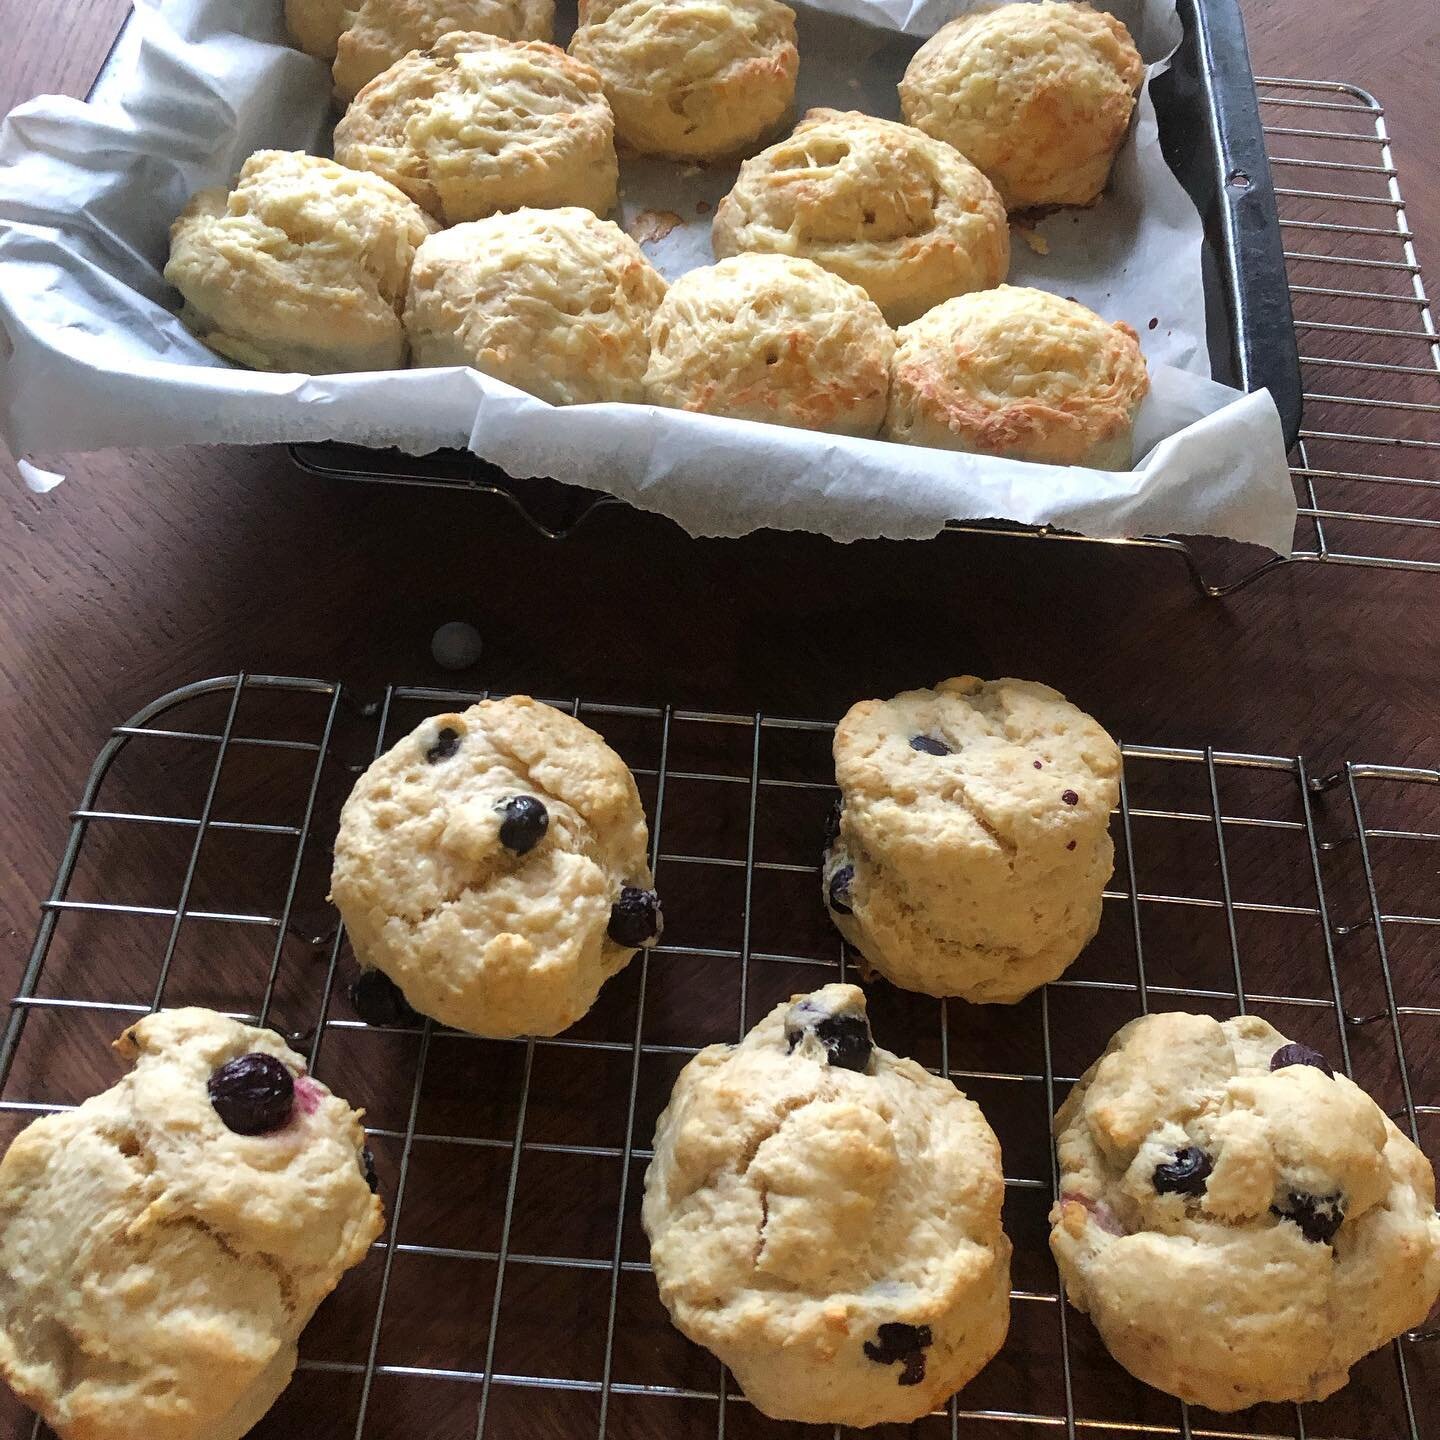 Cheese scones and blueberry scones made today a good day #workaway #bakingskills #nicetobenaughty